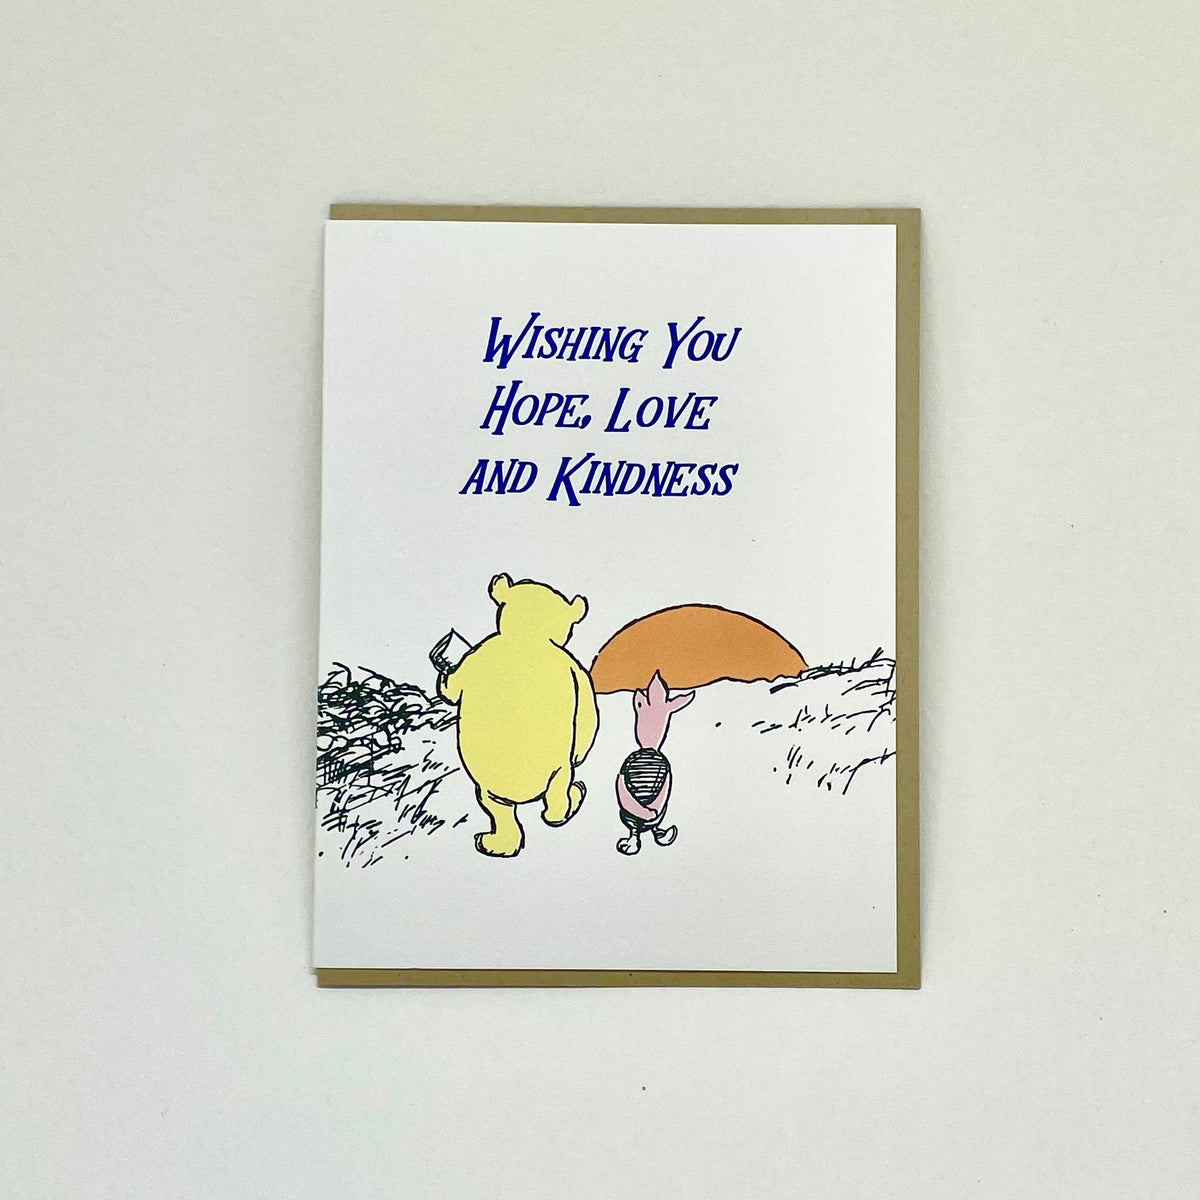 Wishing you Hope, Love, and Kindness - Pooh Card